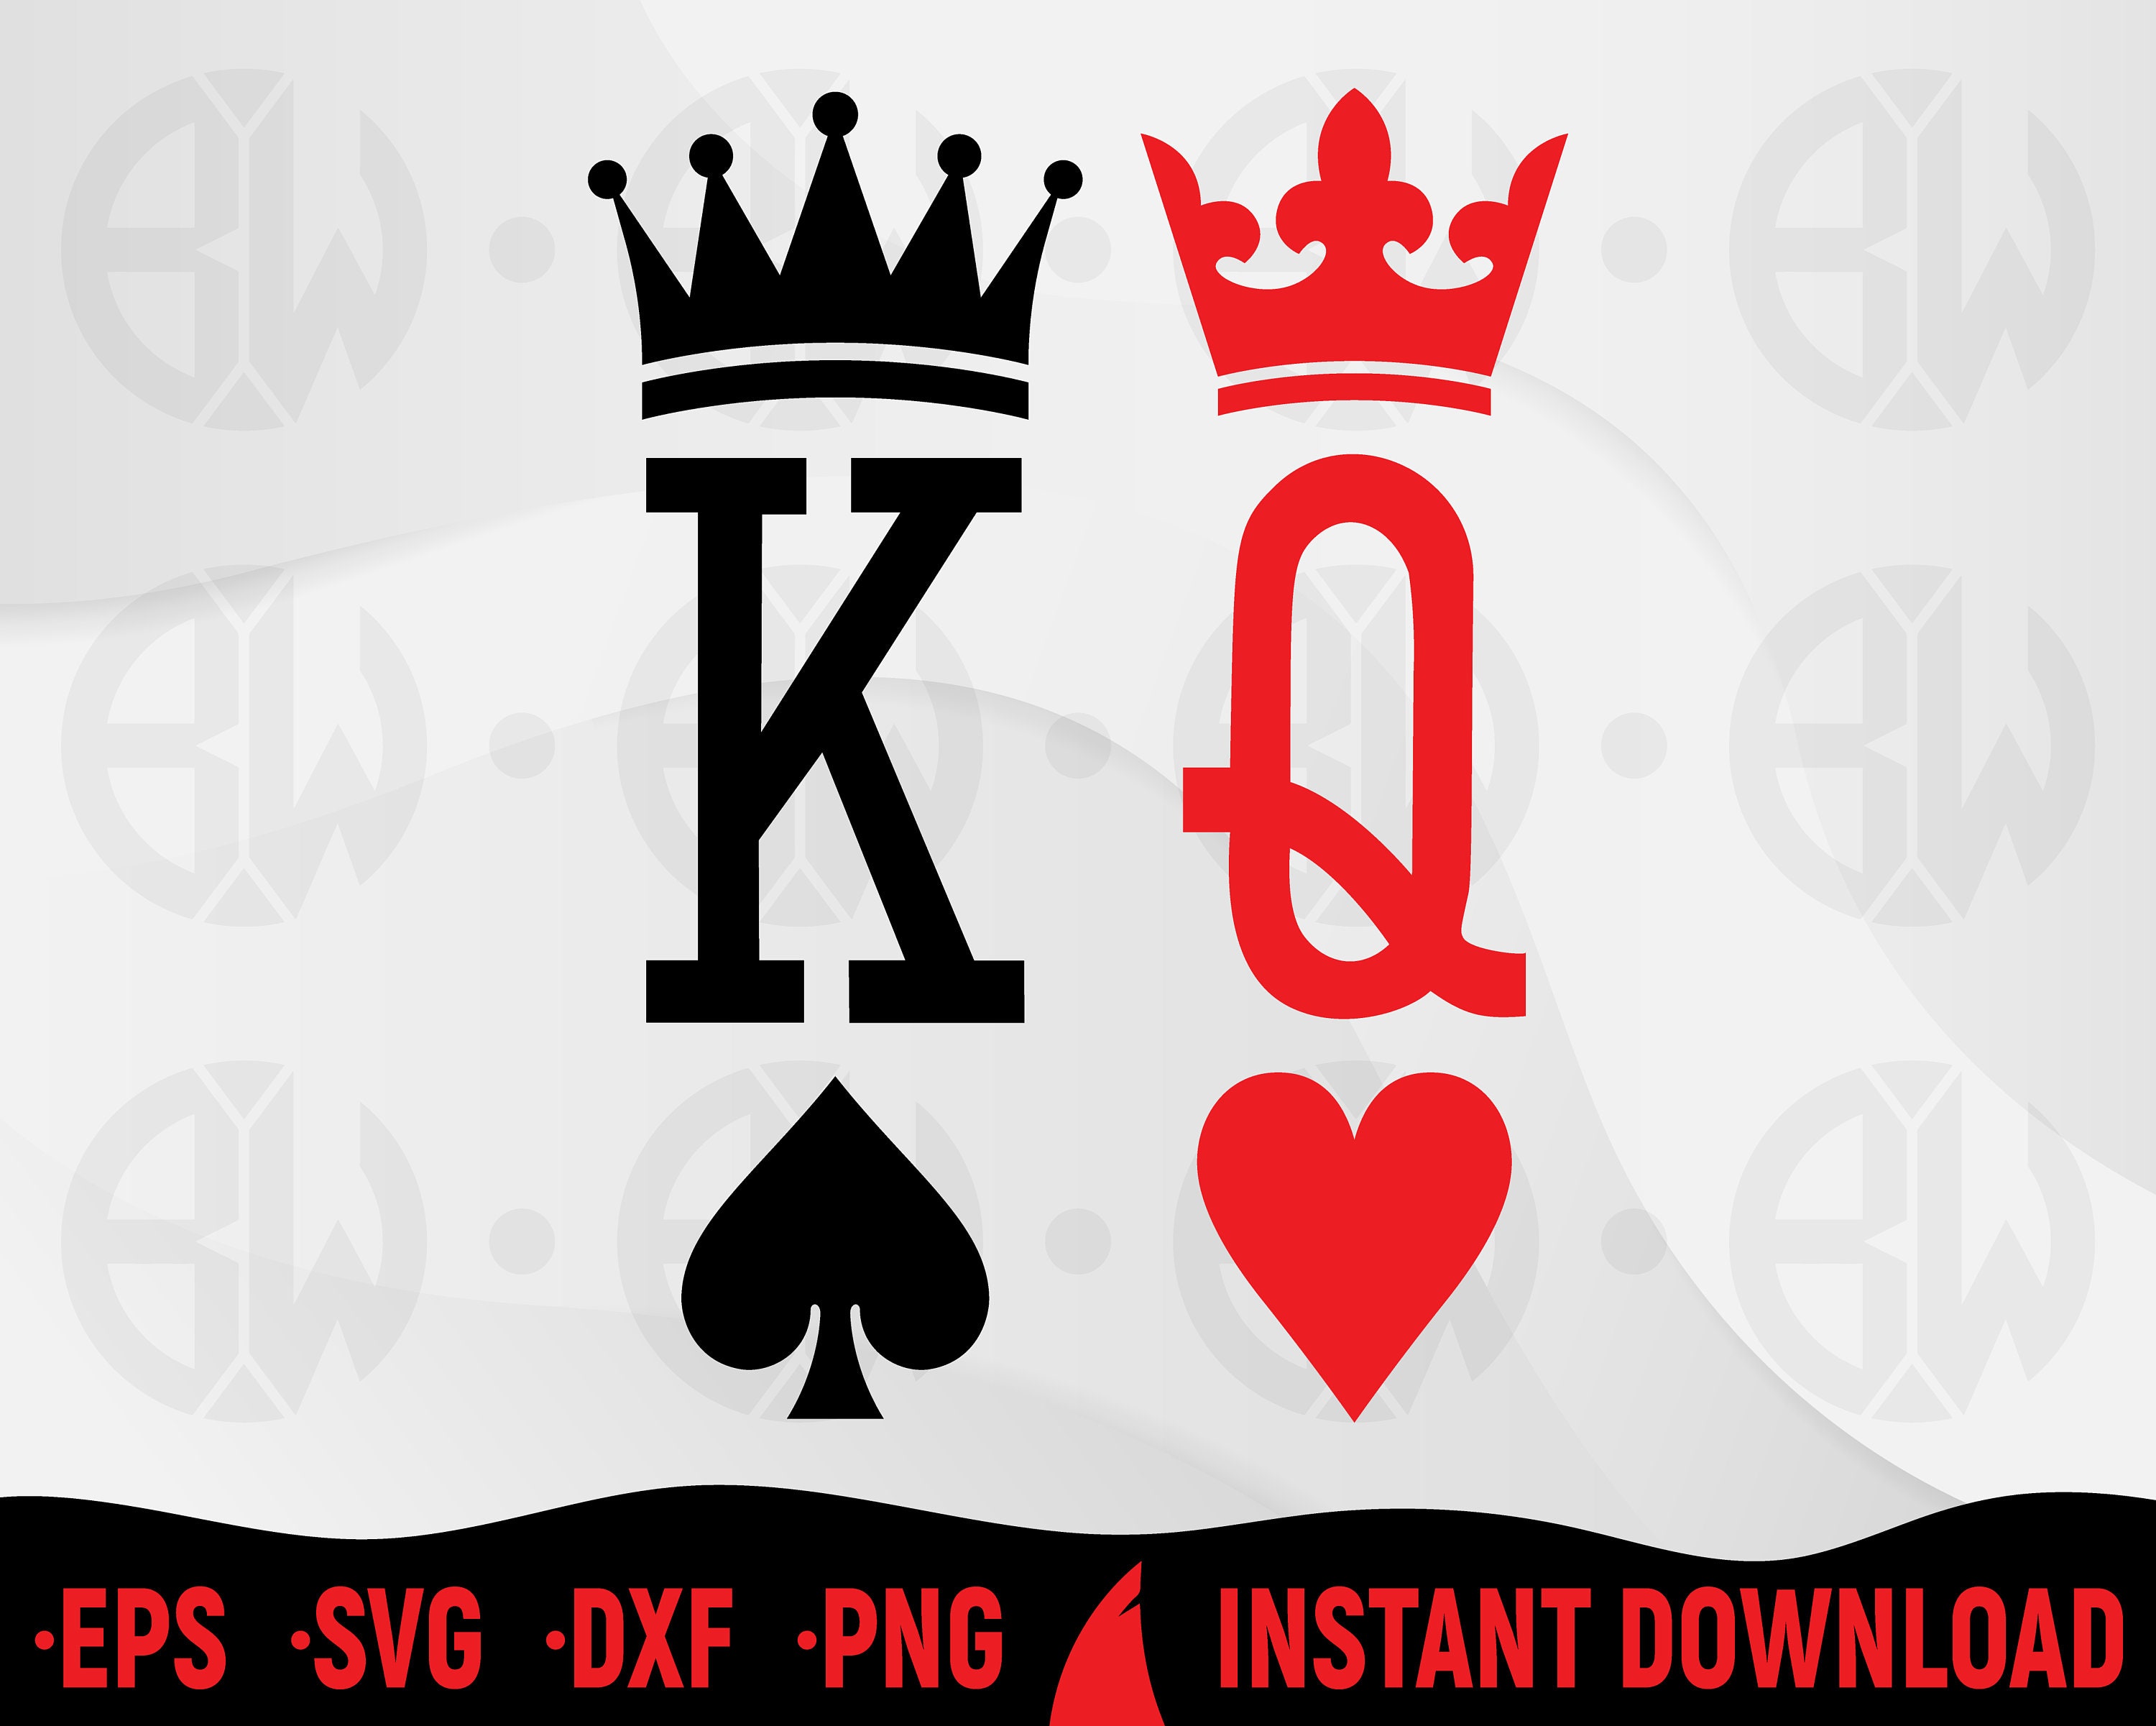 King and Queen SVG, King of Spades, Queen of Hearts Eps, Svg, Dxf, Png,  Royal Svg, Playing Cards Svg, Cutting Files, Design File, King Svg - Etsy  Norway